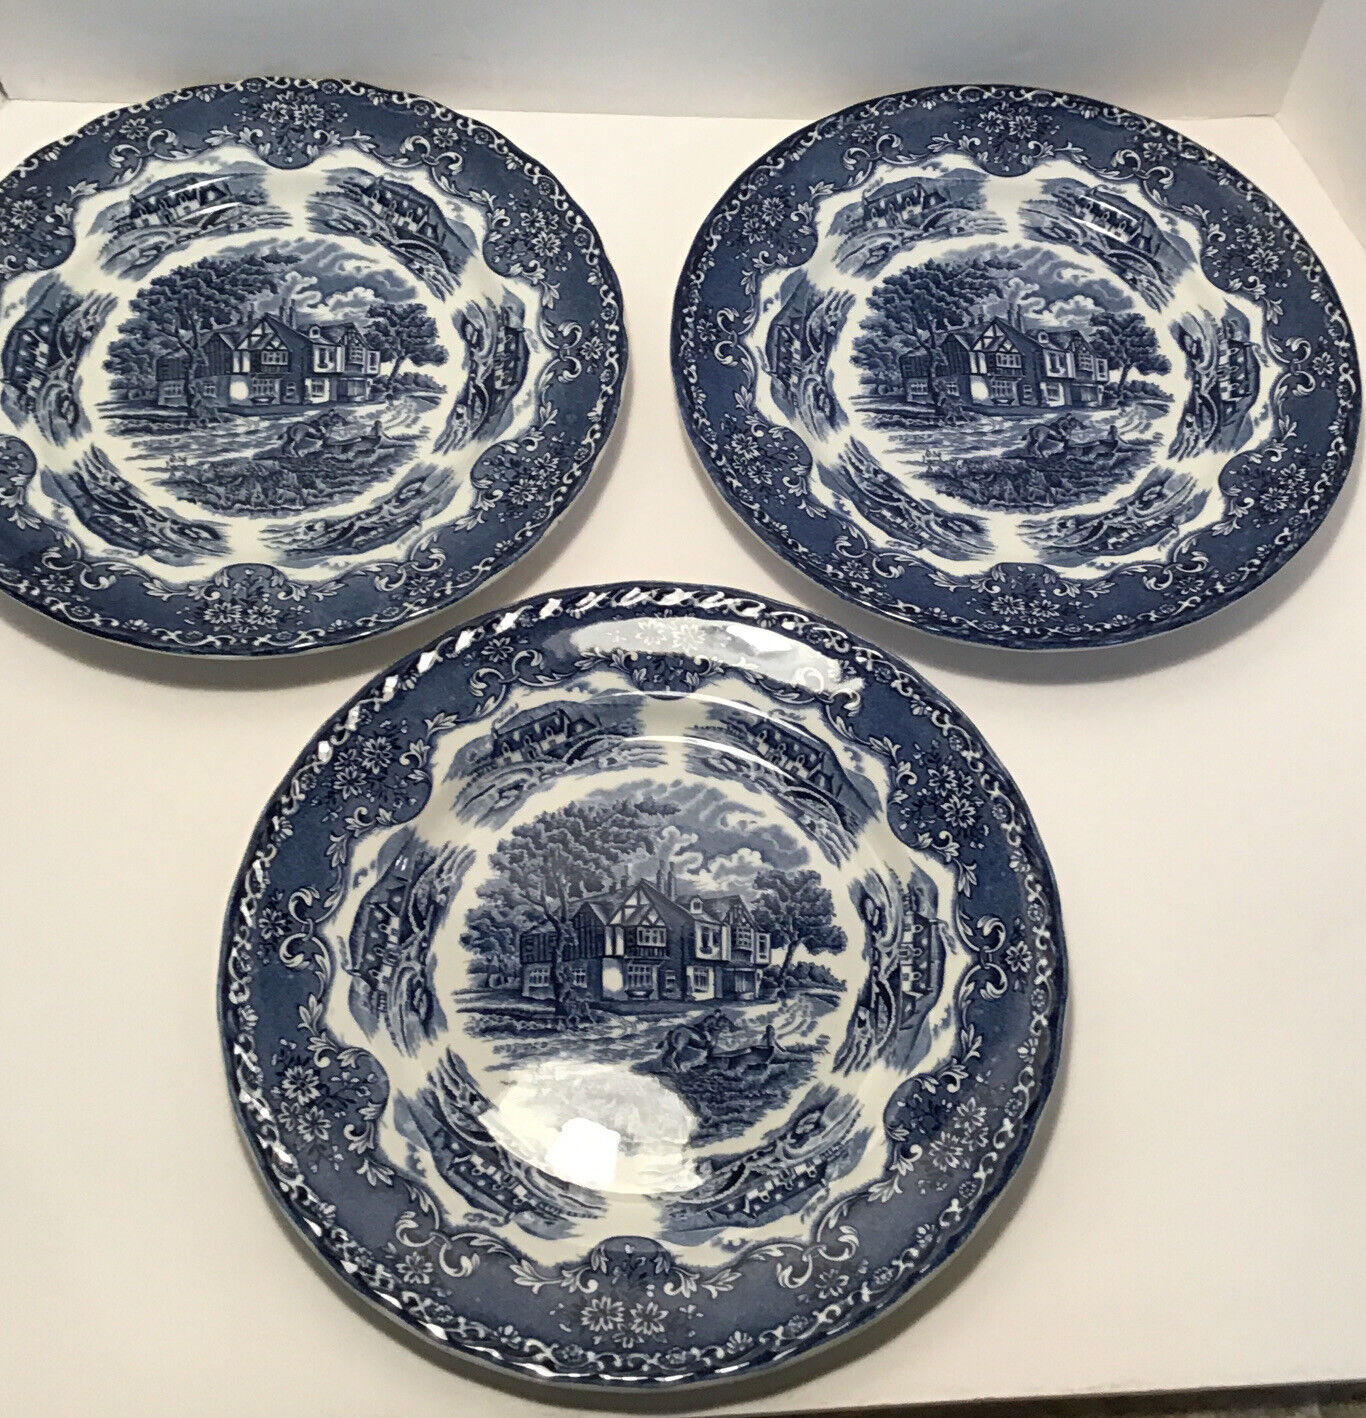 Grindley Dinner Plate 10” English Country Inns 3 Ct Set Staffordshire Blue/White